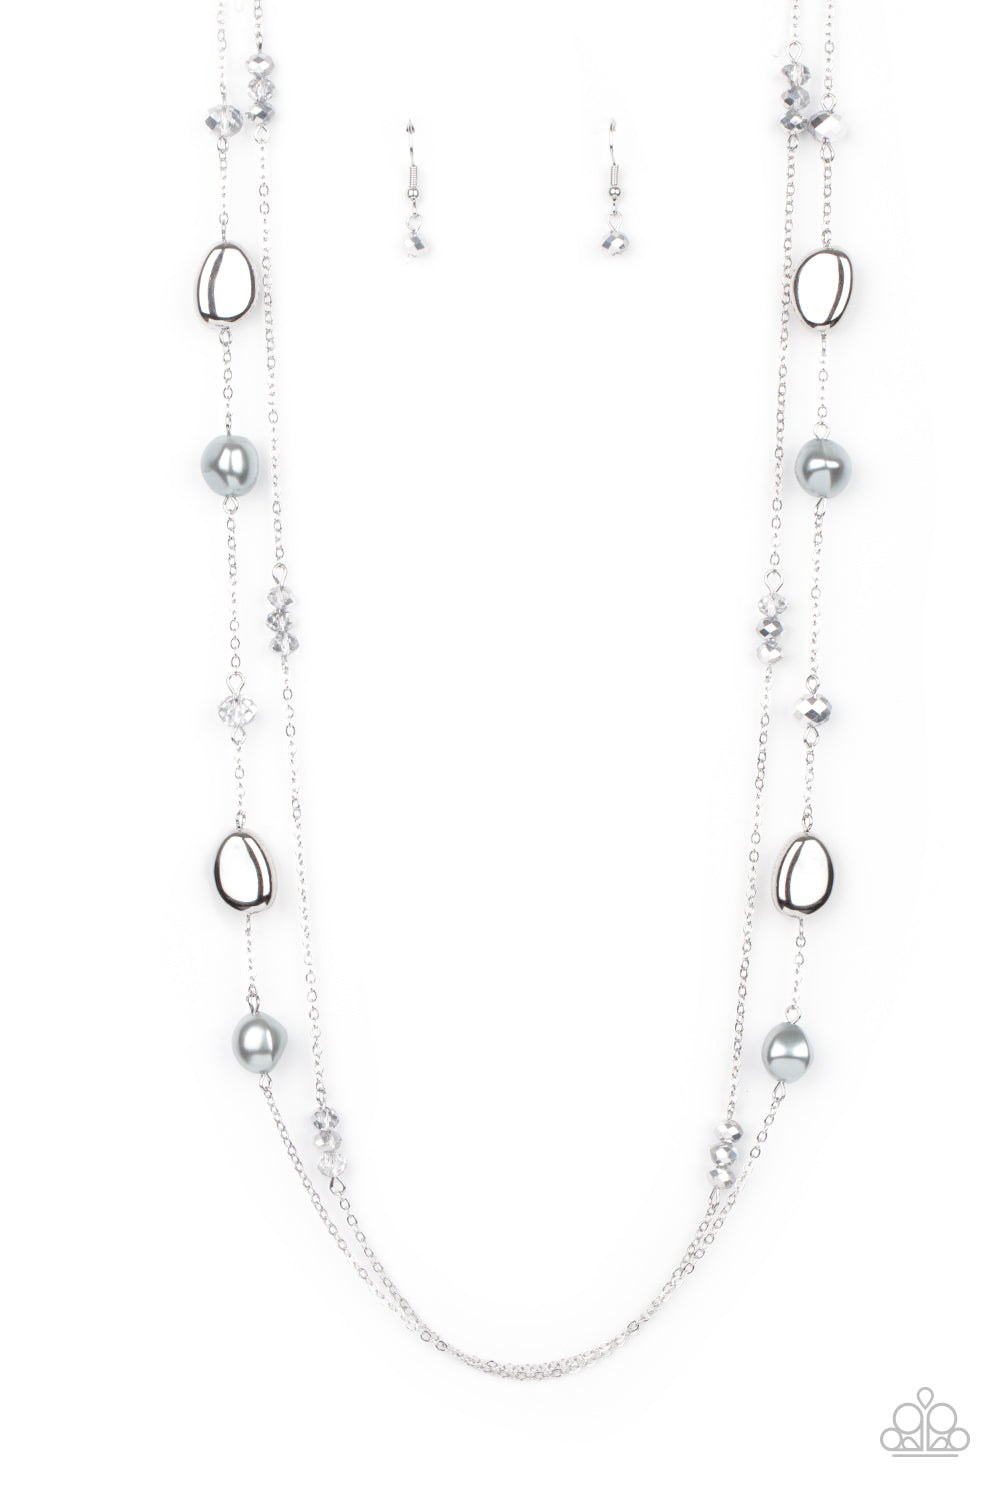 Paparazzi Gala Goals - Silver Necklace - A Finishing Touch Jewelry